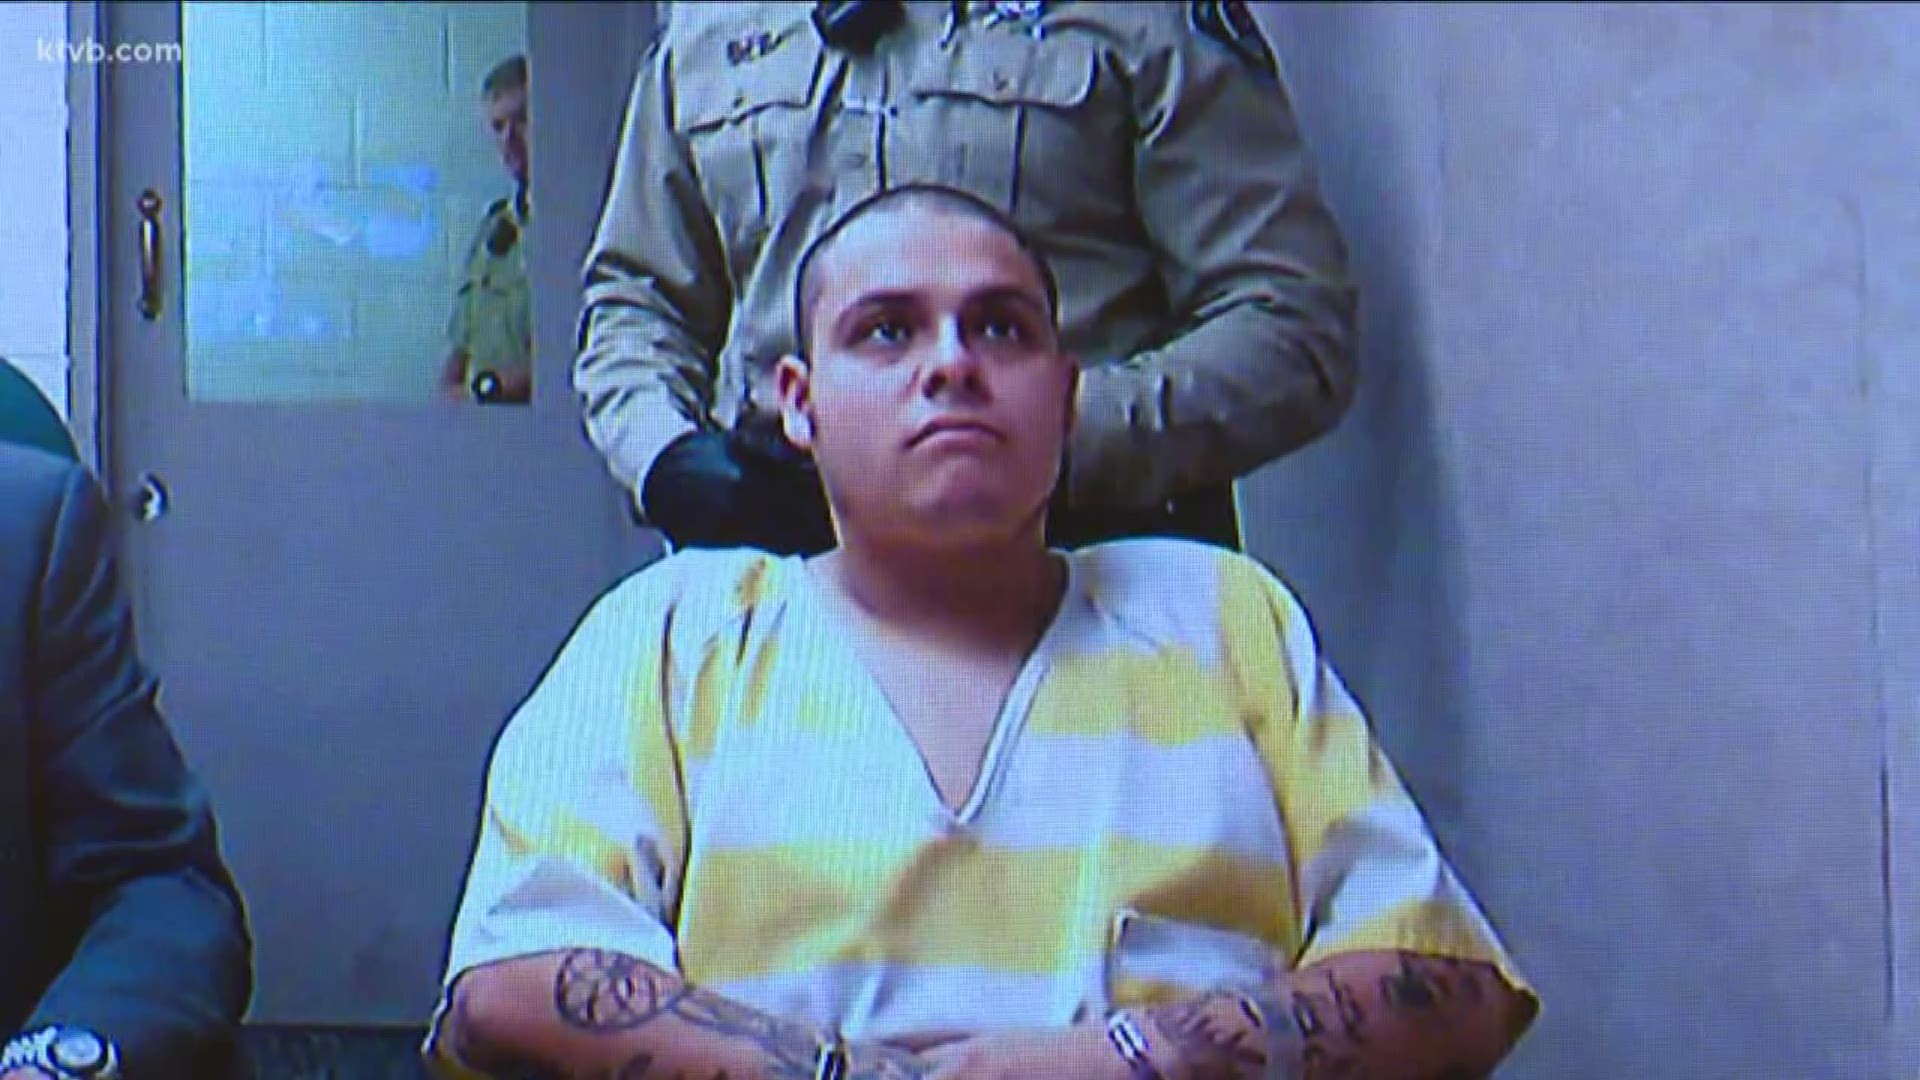 Carlos Sandoval is charged with first-degree murder and two other felonies.